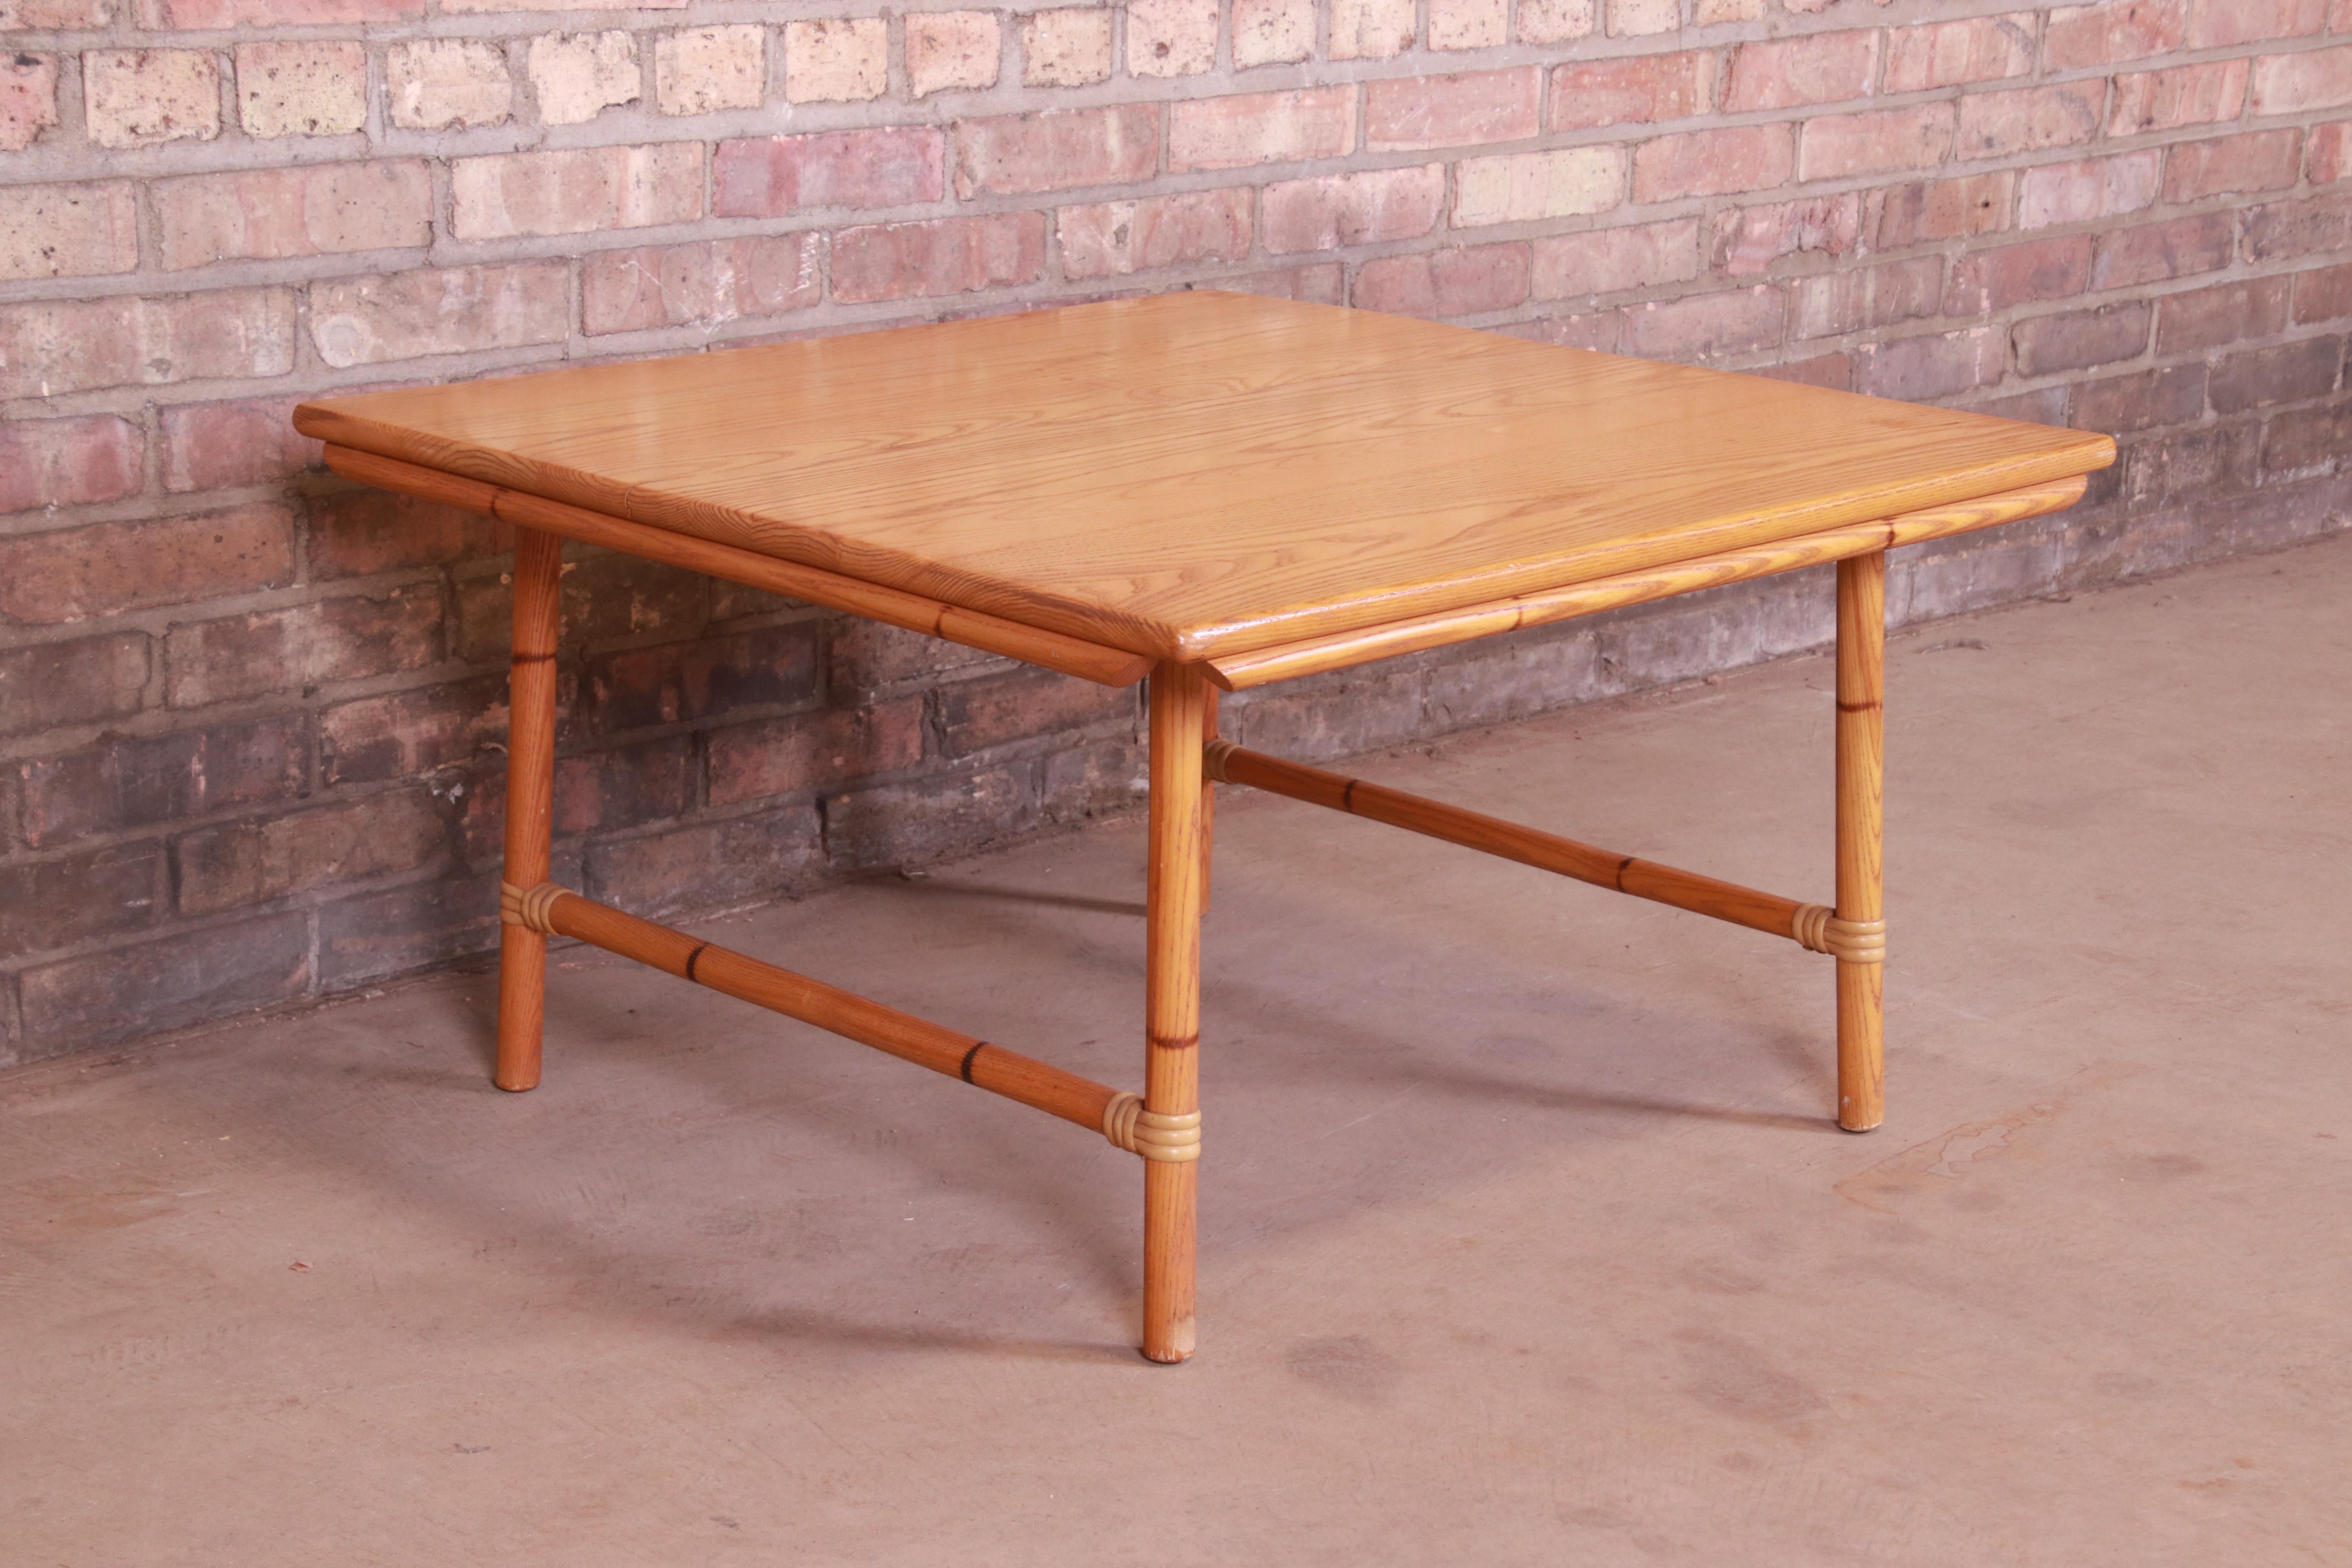 Mid-20th Century Heywood Wakefield Ashcraft Hollywood Regency Bamboo Form Coffee Table, 1950s For Sale